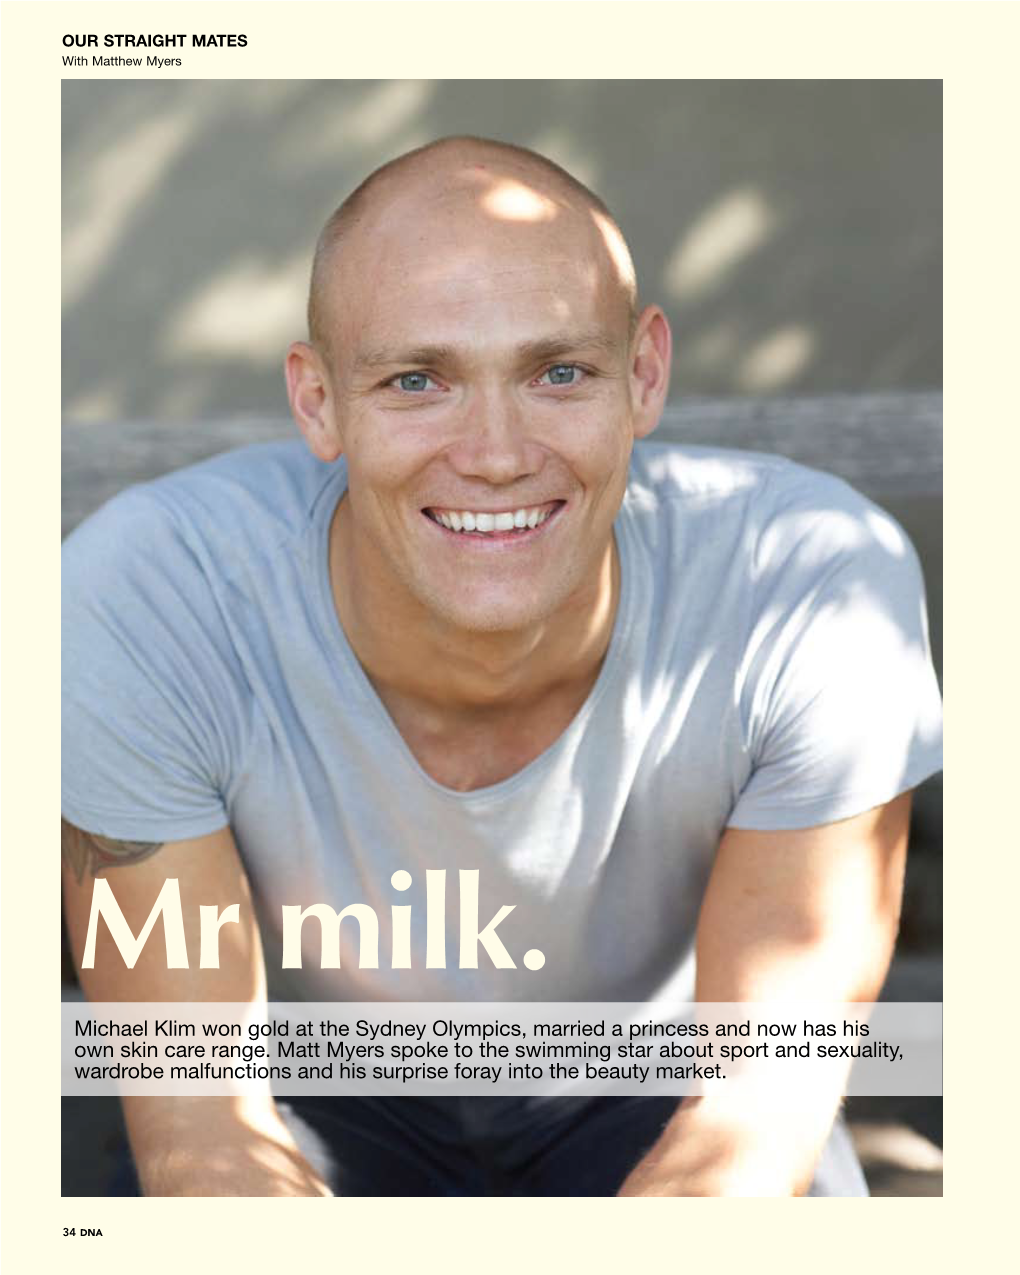 Michael Klim Won Gold at the Sydney Olympics, Married a Princess and Now Has His Own Skin Care Range